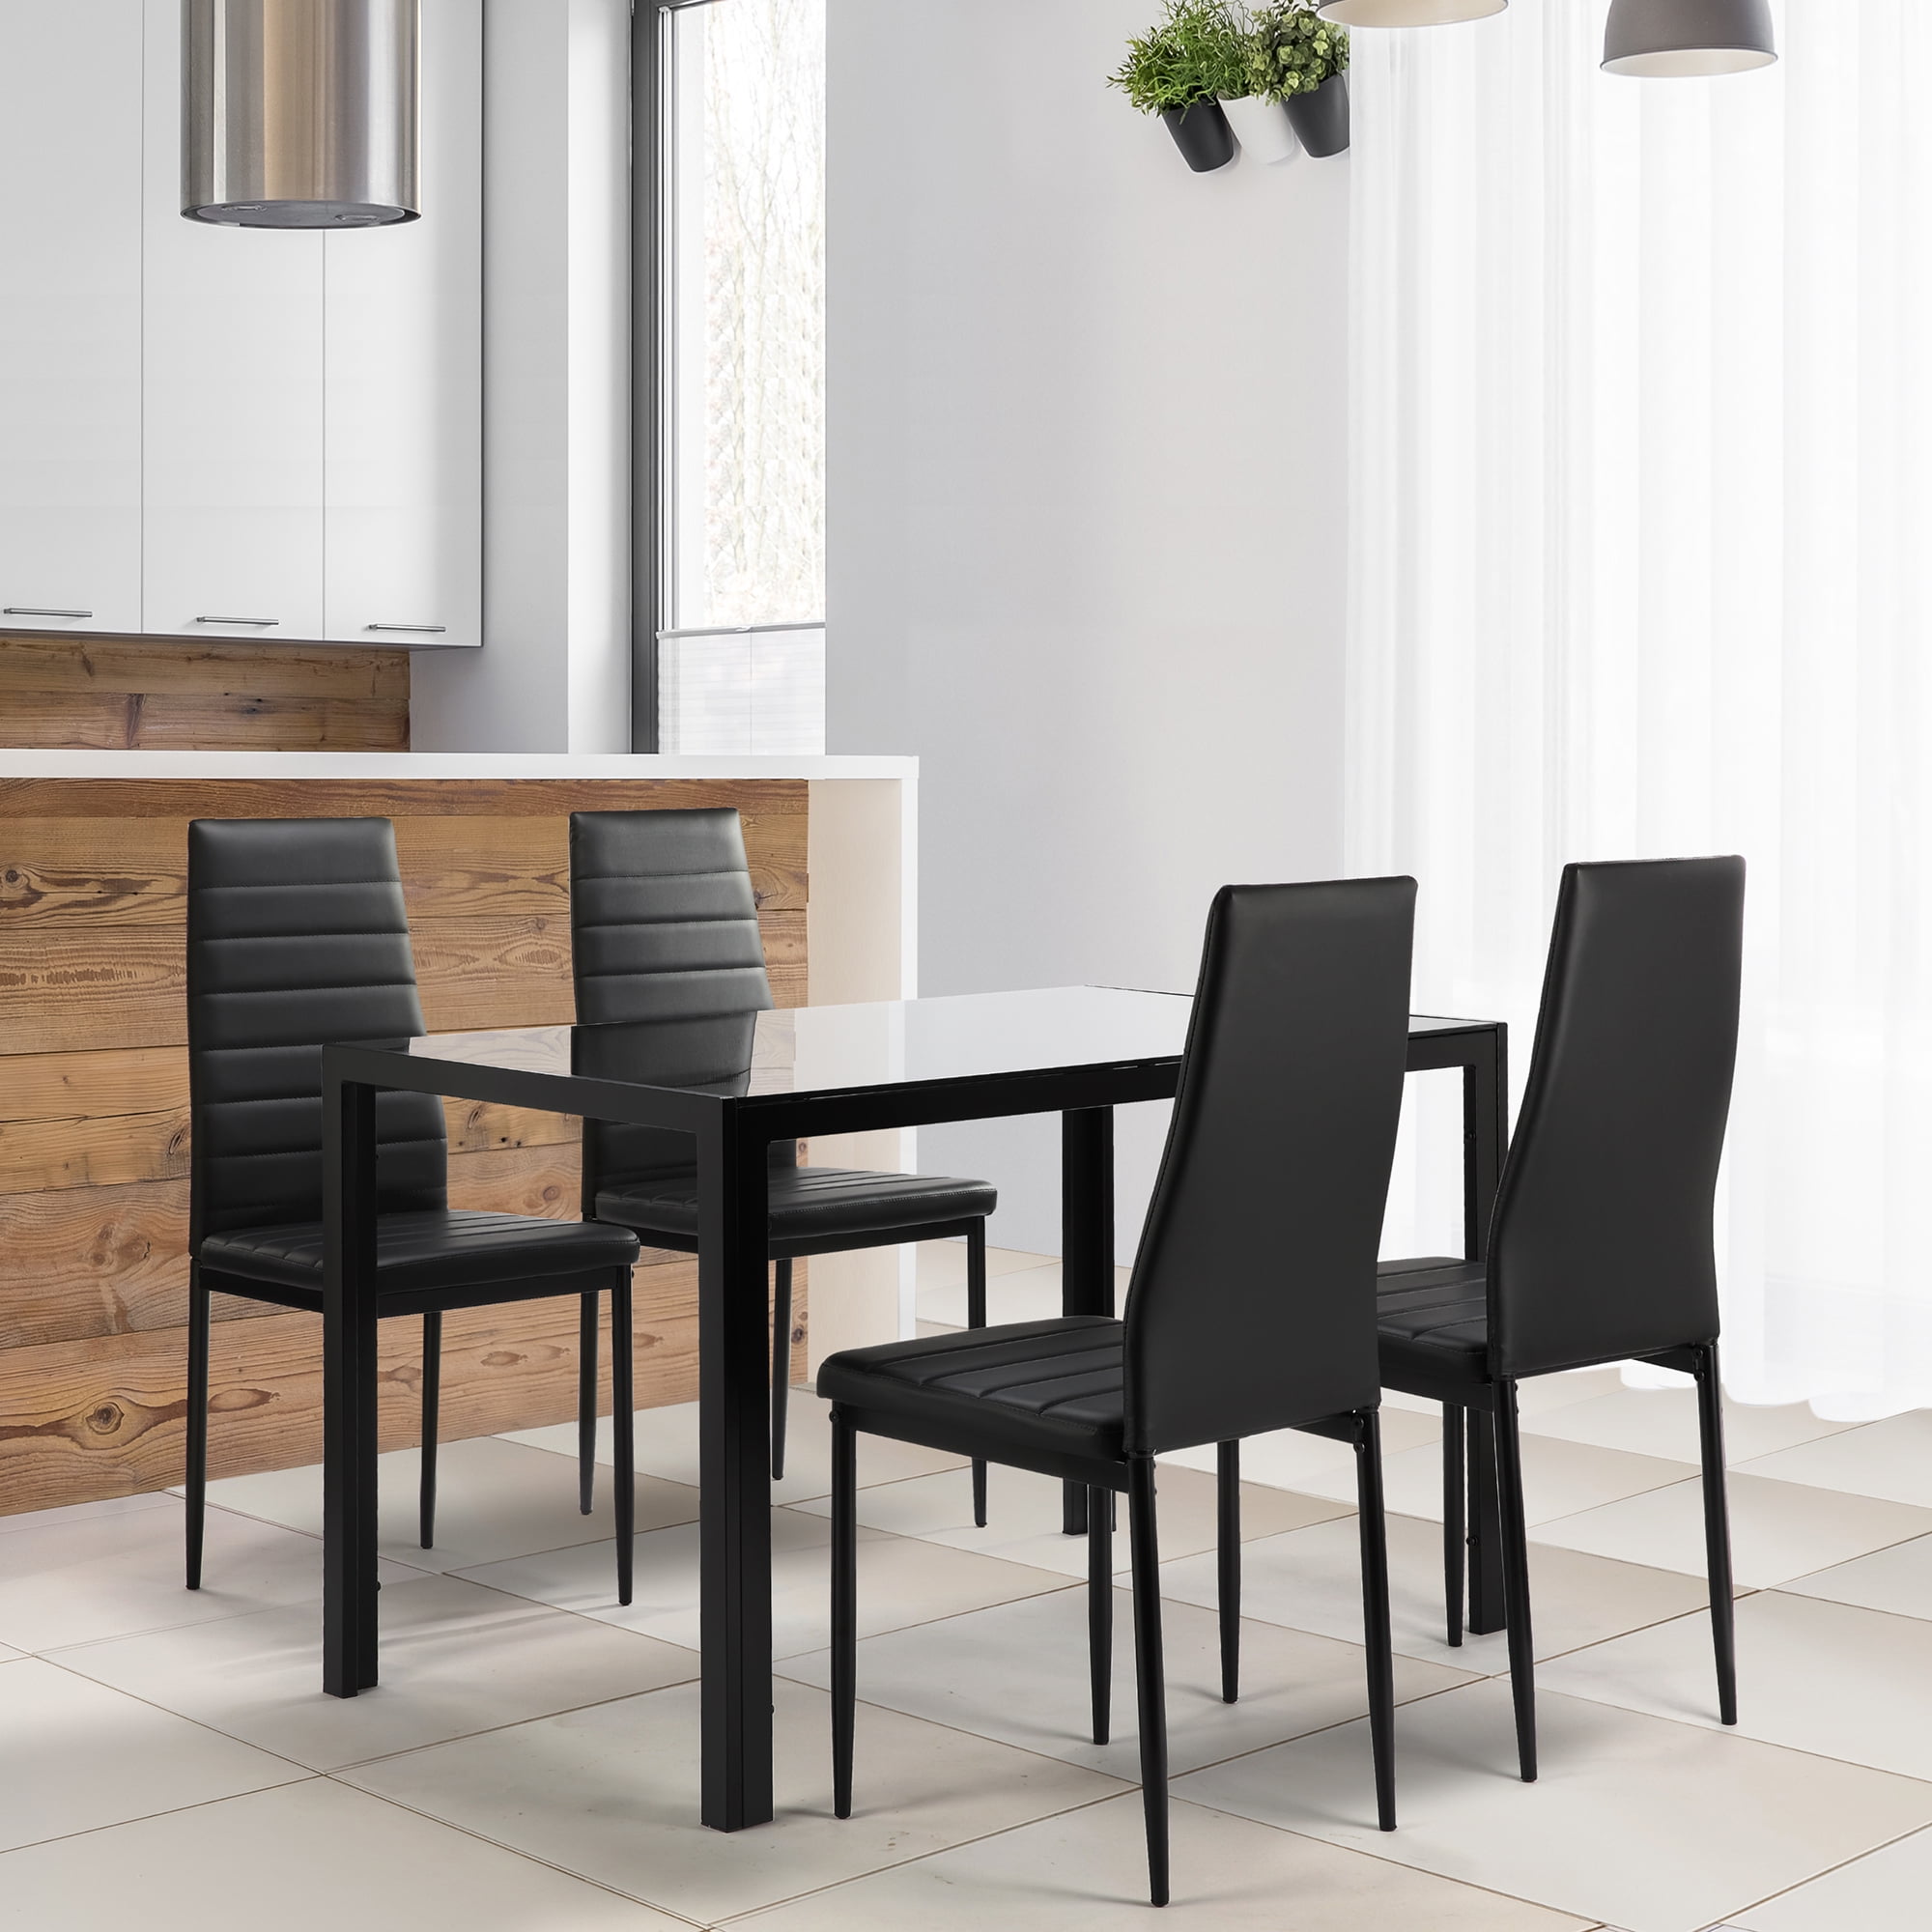 Kitchen Dining Table Chair Set, Small Dining Room Table For 4